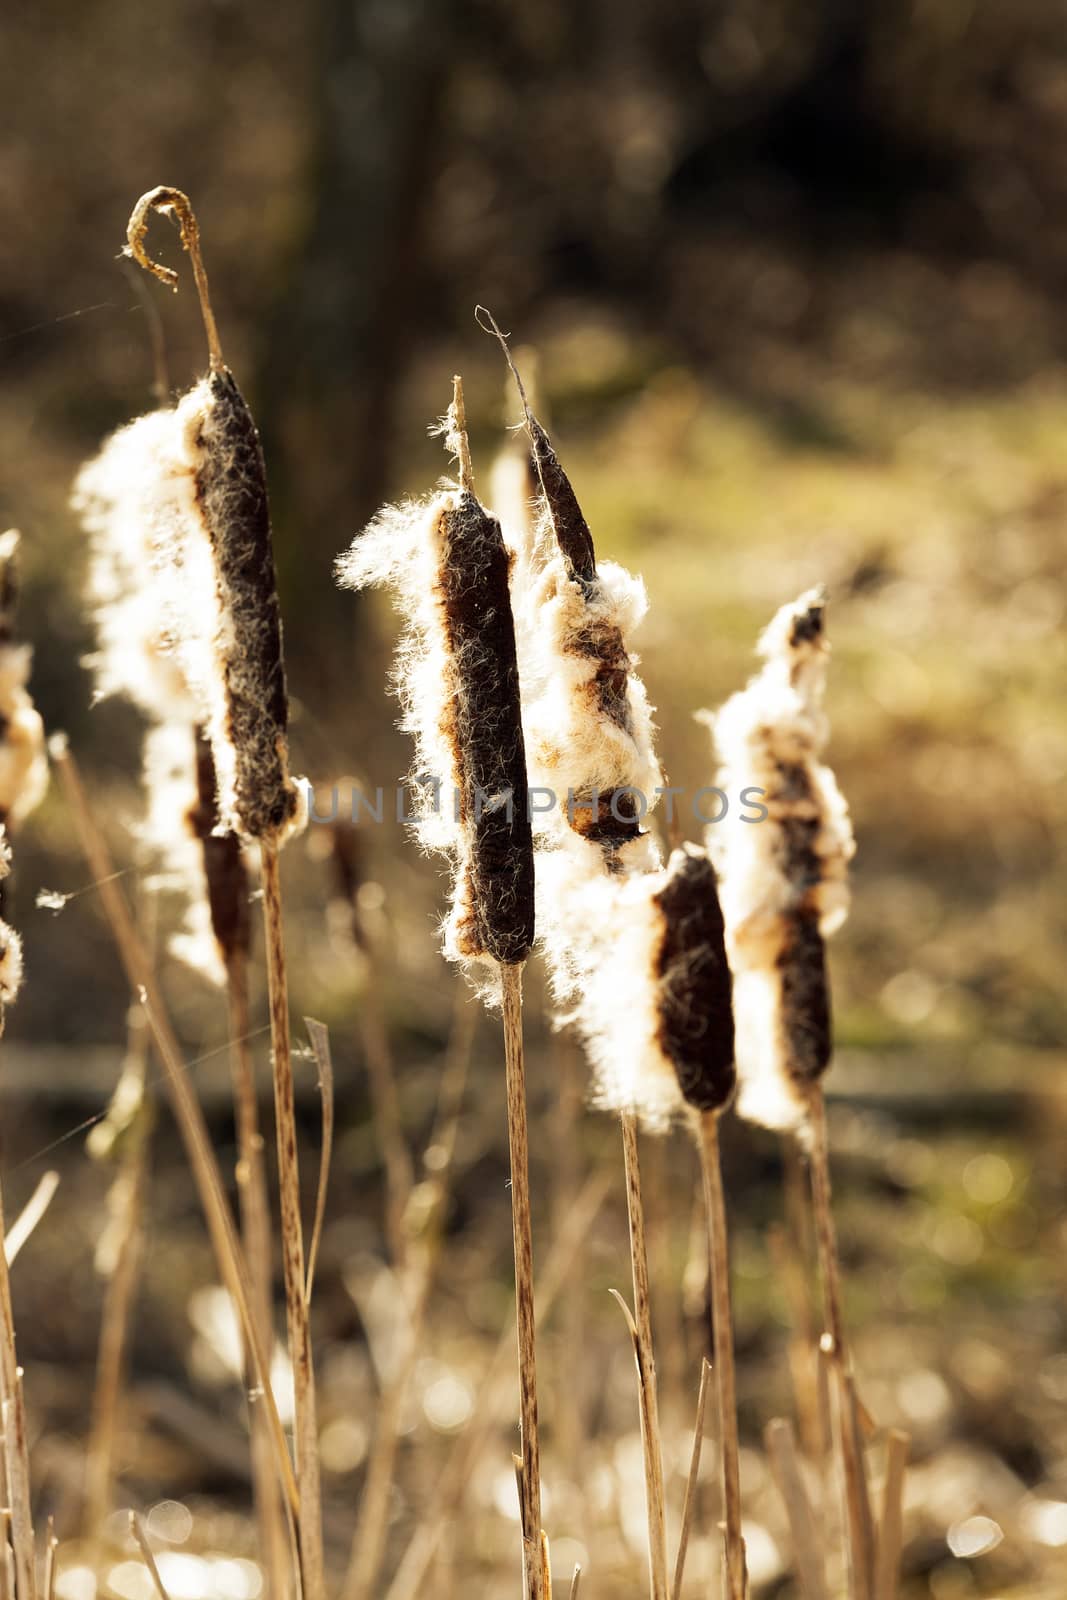   photographed close-up of yellowed reeds in spring season